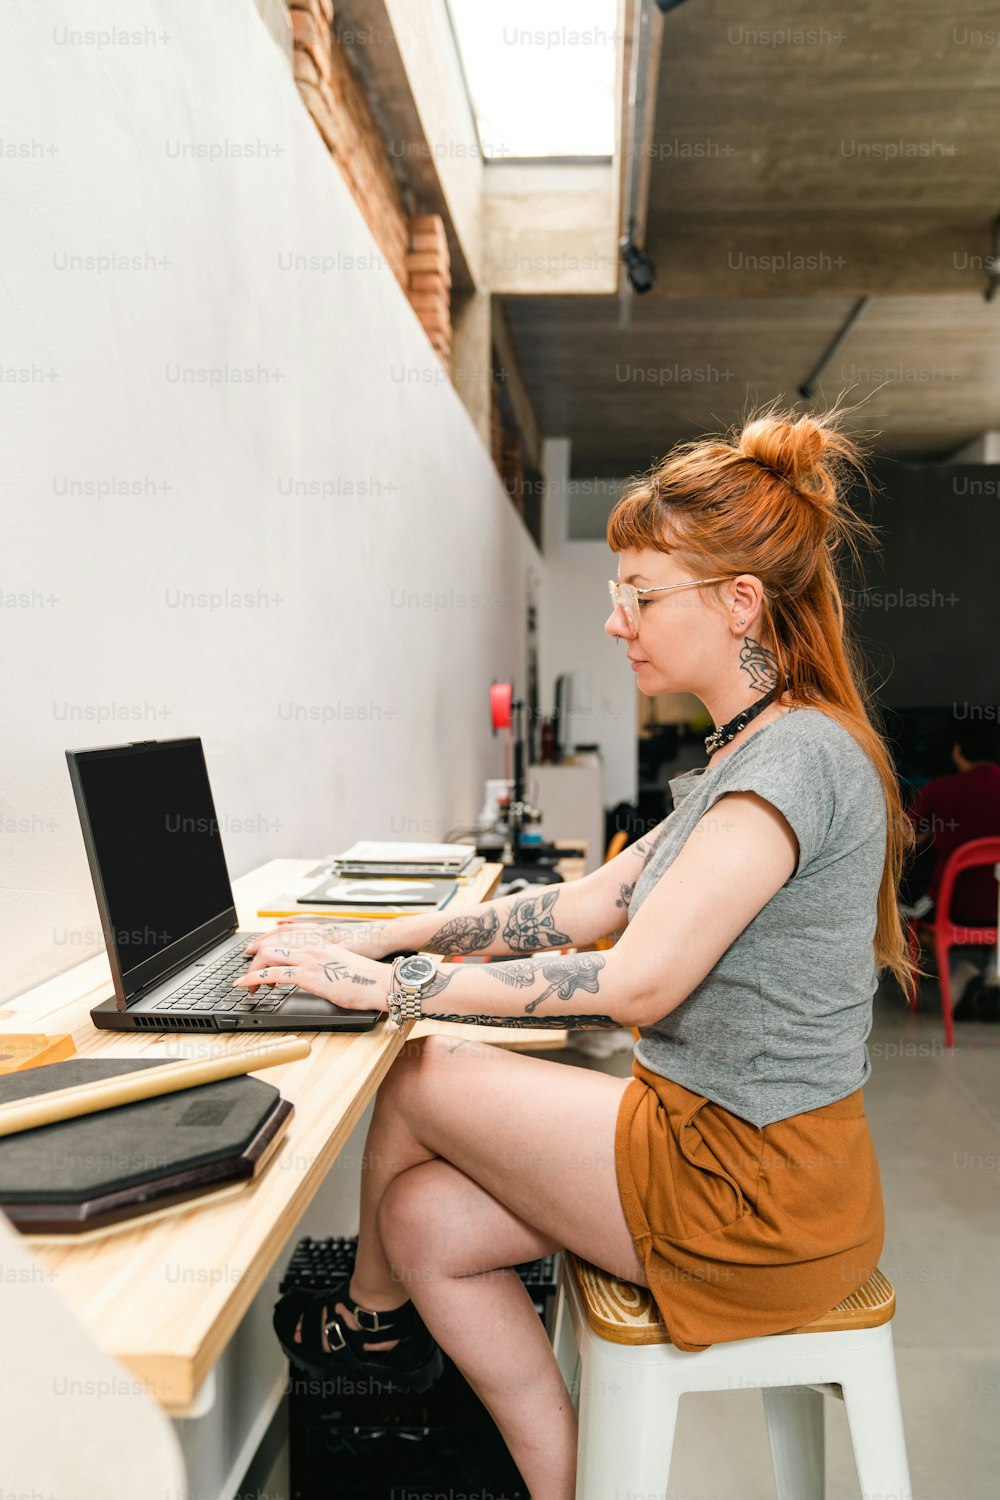 a woman sitting at a desk using a laptop computer